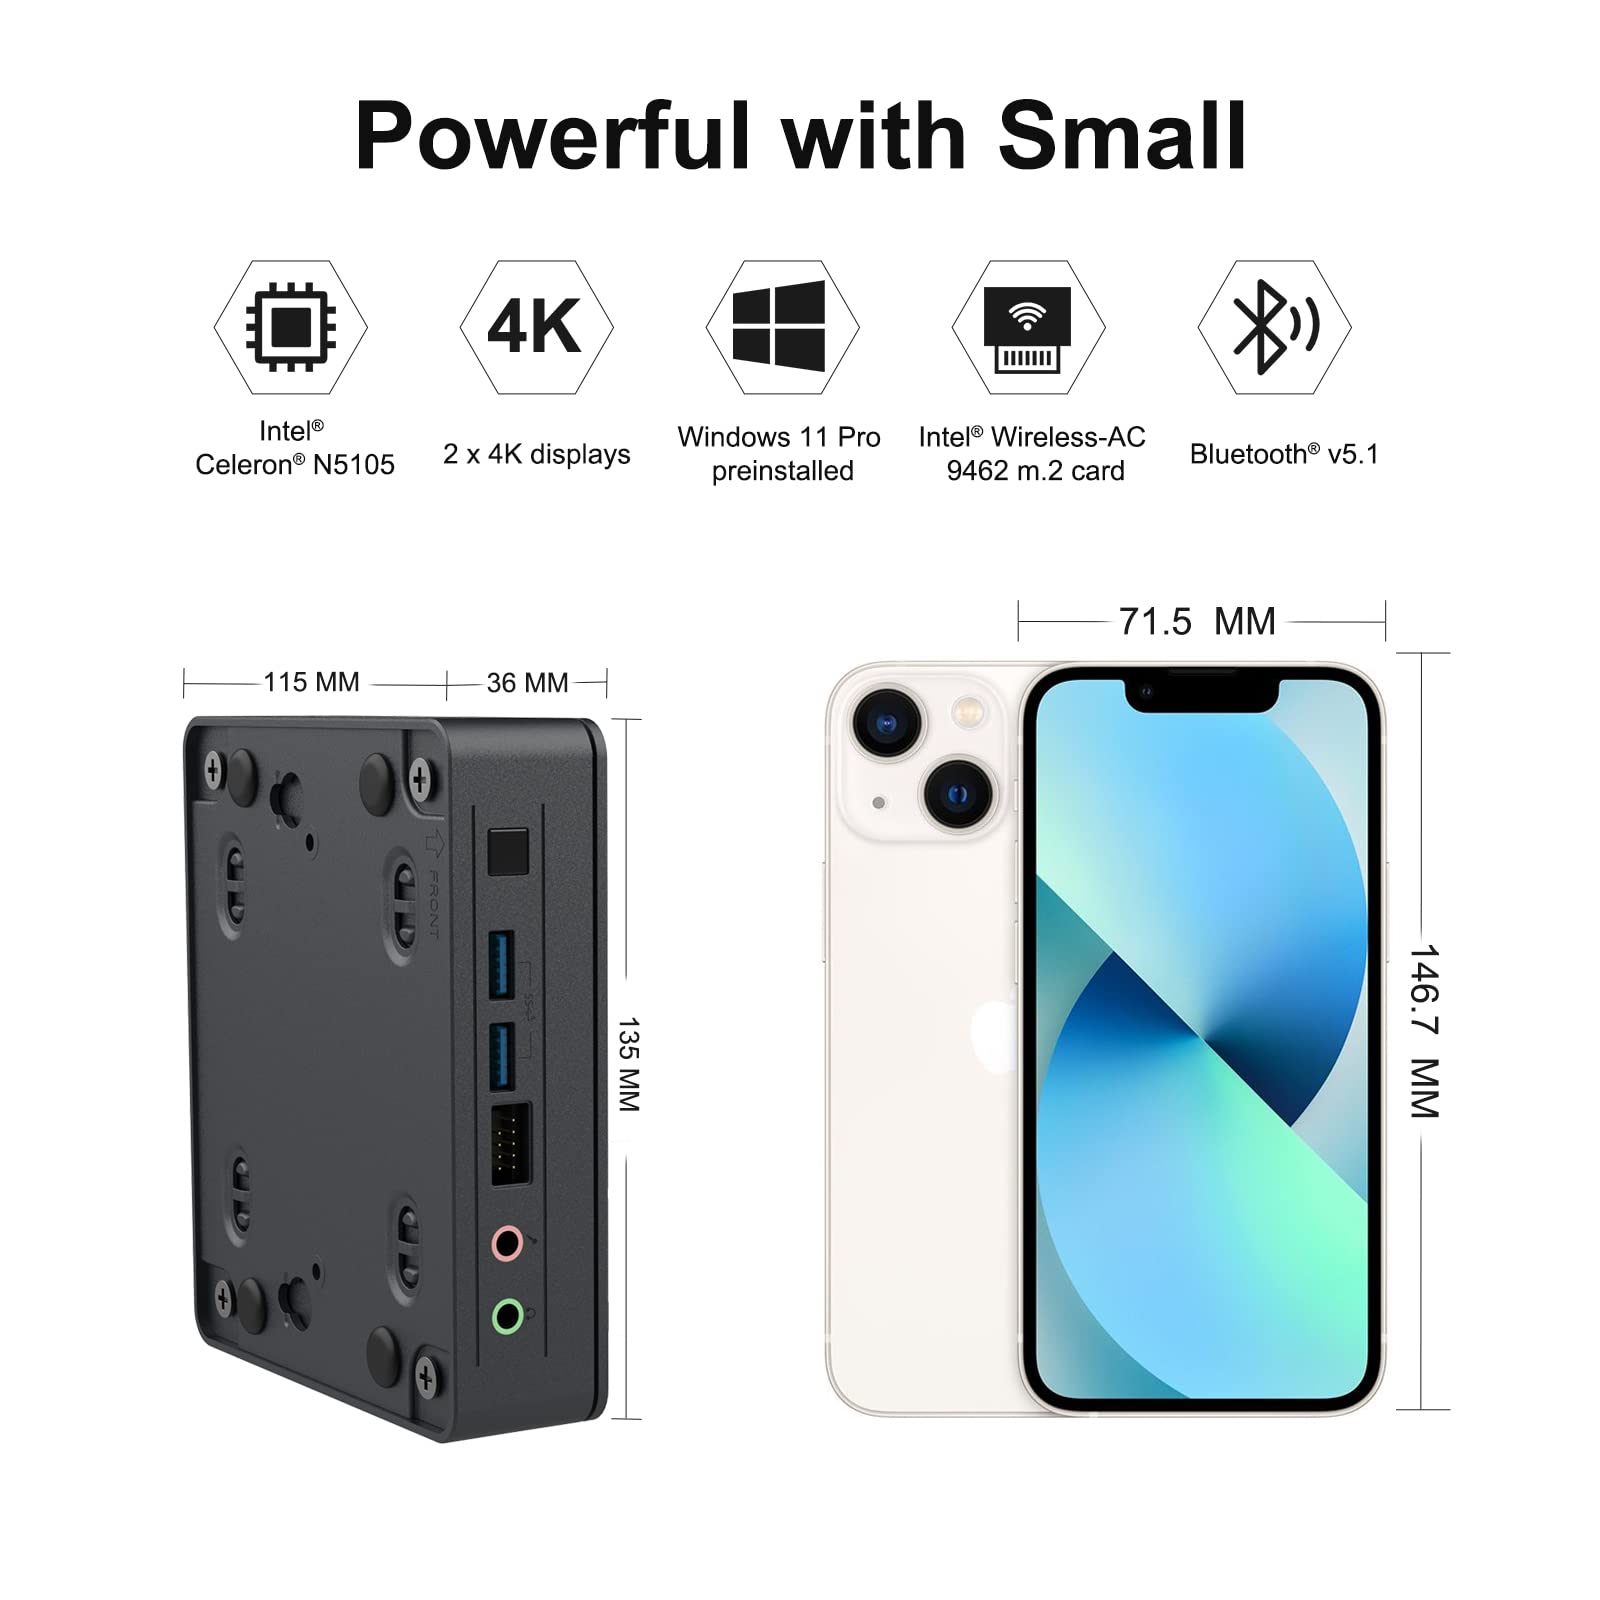 NUC11ATKC4 is a powerful Mini PC with small size 